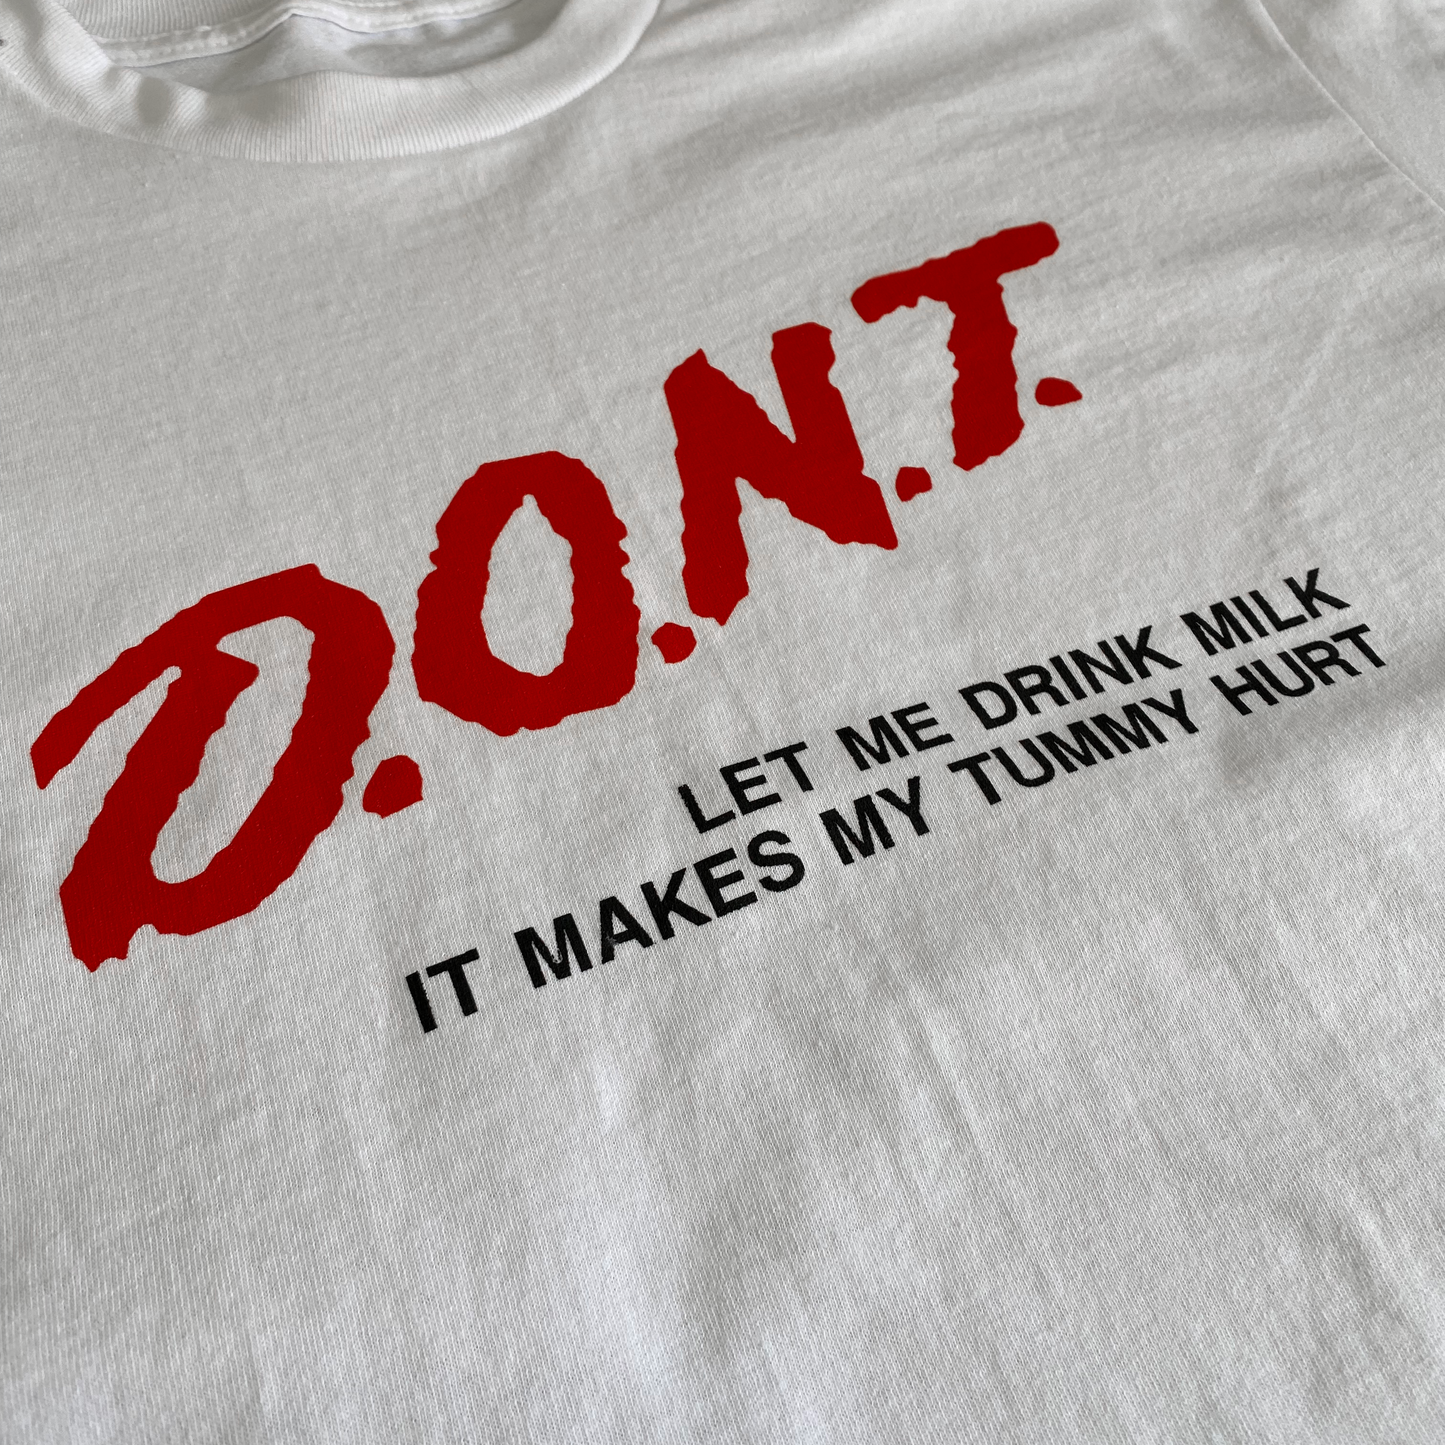 DONT LET ME DRINK MILK IT MAKES MY TUMMY SHIRT DARE SHIRT